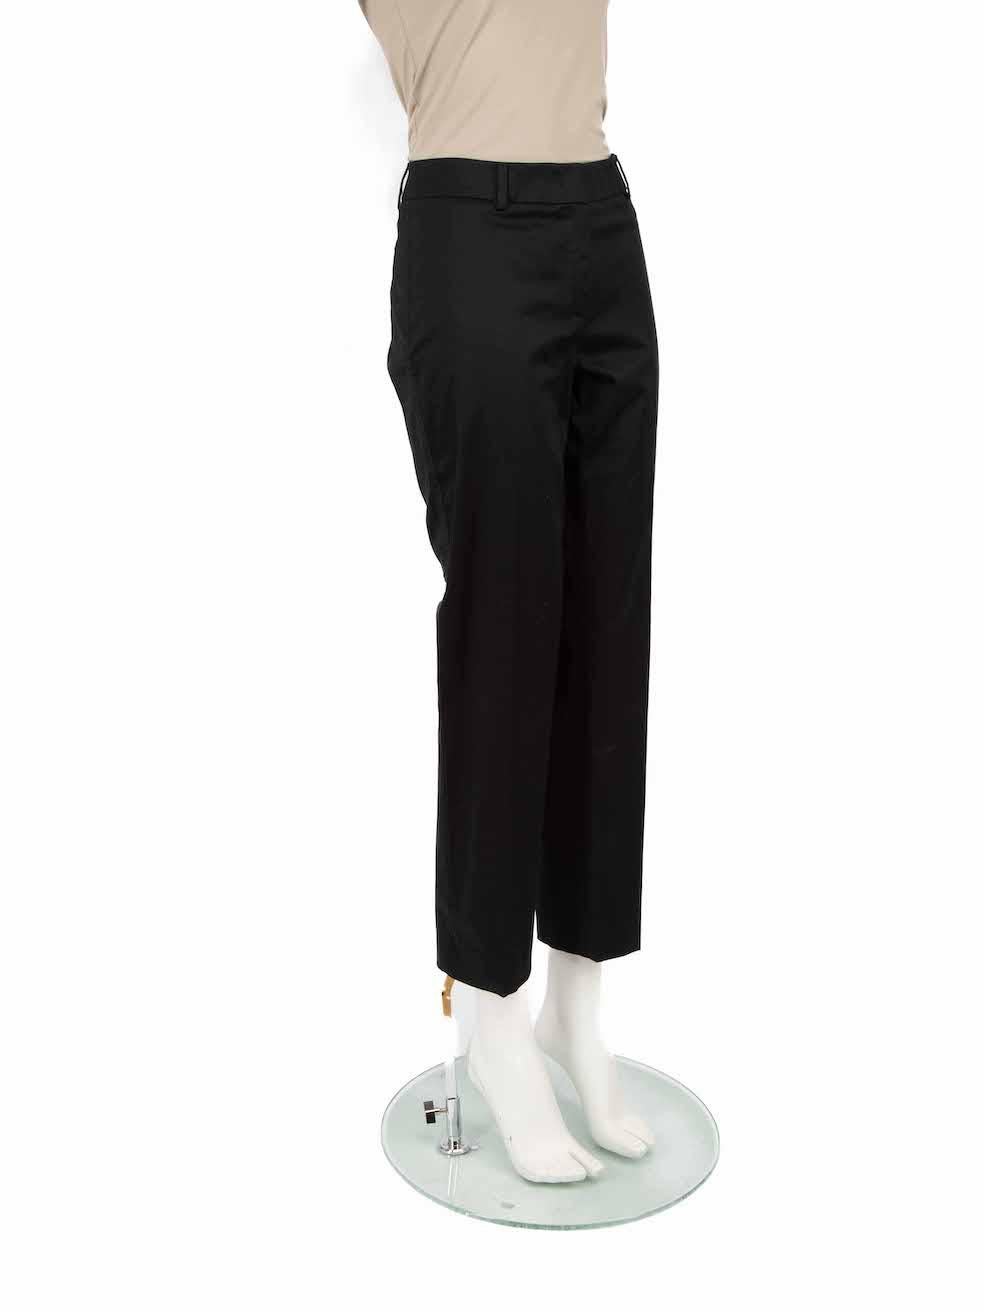 CONDITION is Very good. Hardly any visible wear to trouser is evident on this used Weekend Max Mara designer resale item.
 
 
 
 Details
 
 
 Black
 
 Cotton
 
 Straight leg trousers
 
 Low rise
 
 Belt hoops
 
 Front zip closure with clasp and